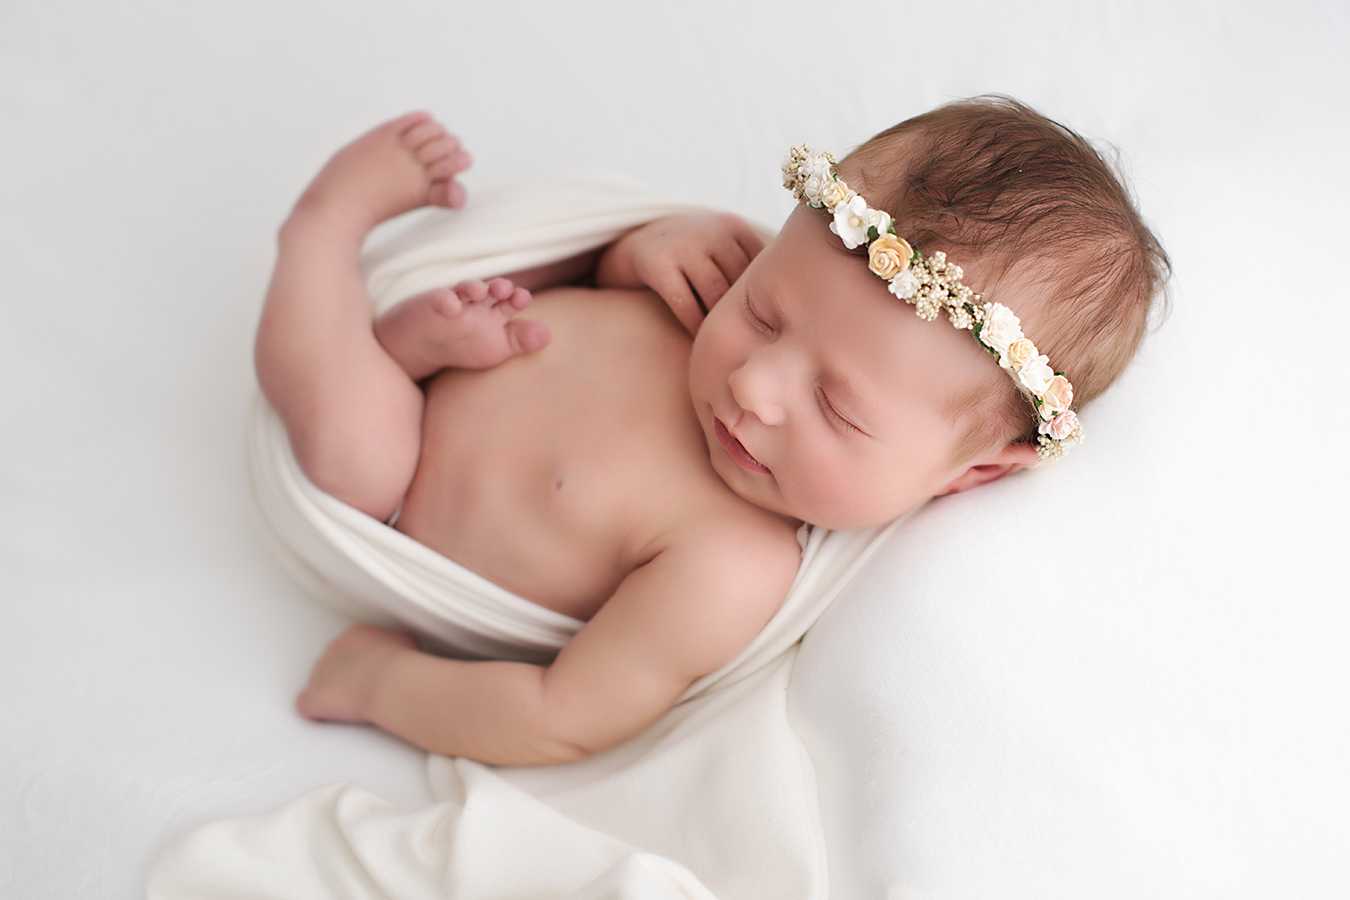 Professional baby photography – Tips on How to Get it Right Every Time